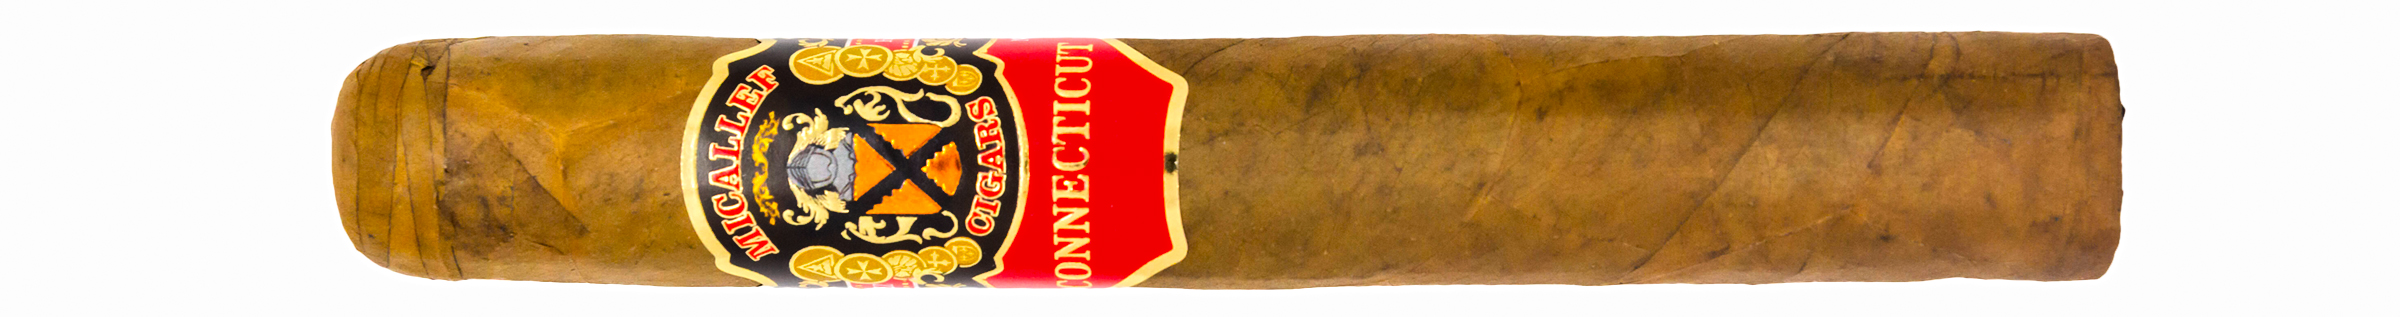 A cigar with Micallef Connecticut label